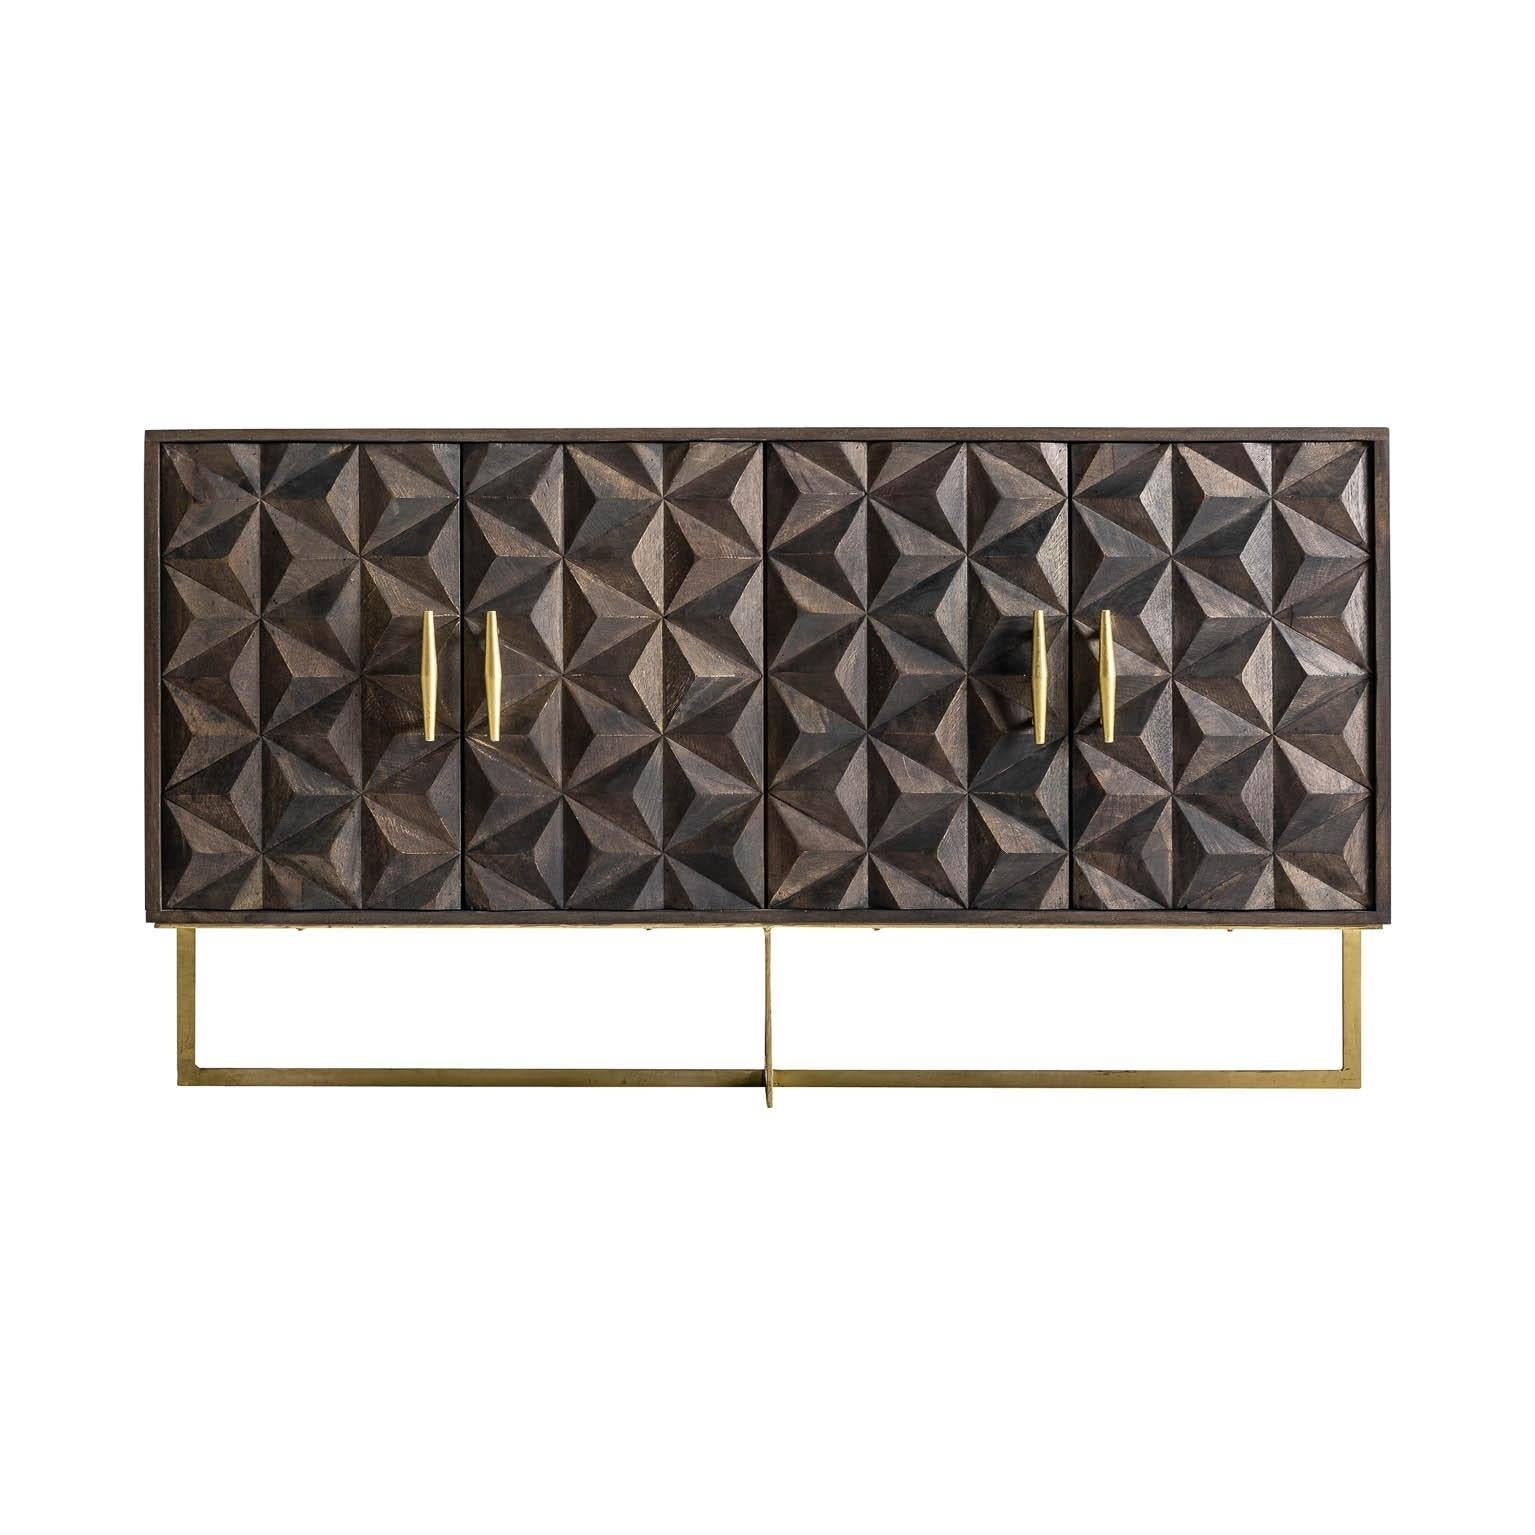 Brutalist style sideboard: An eyecatcher with geometrical and harmonious lines, composed of 4 graphic panels doors adorned with gilded handles and airy metal feet.